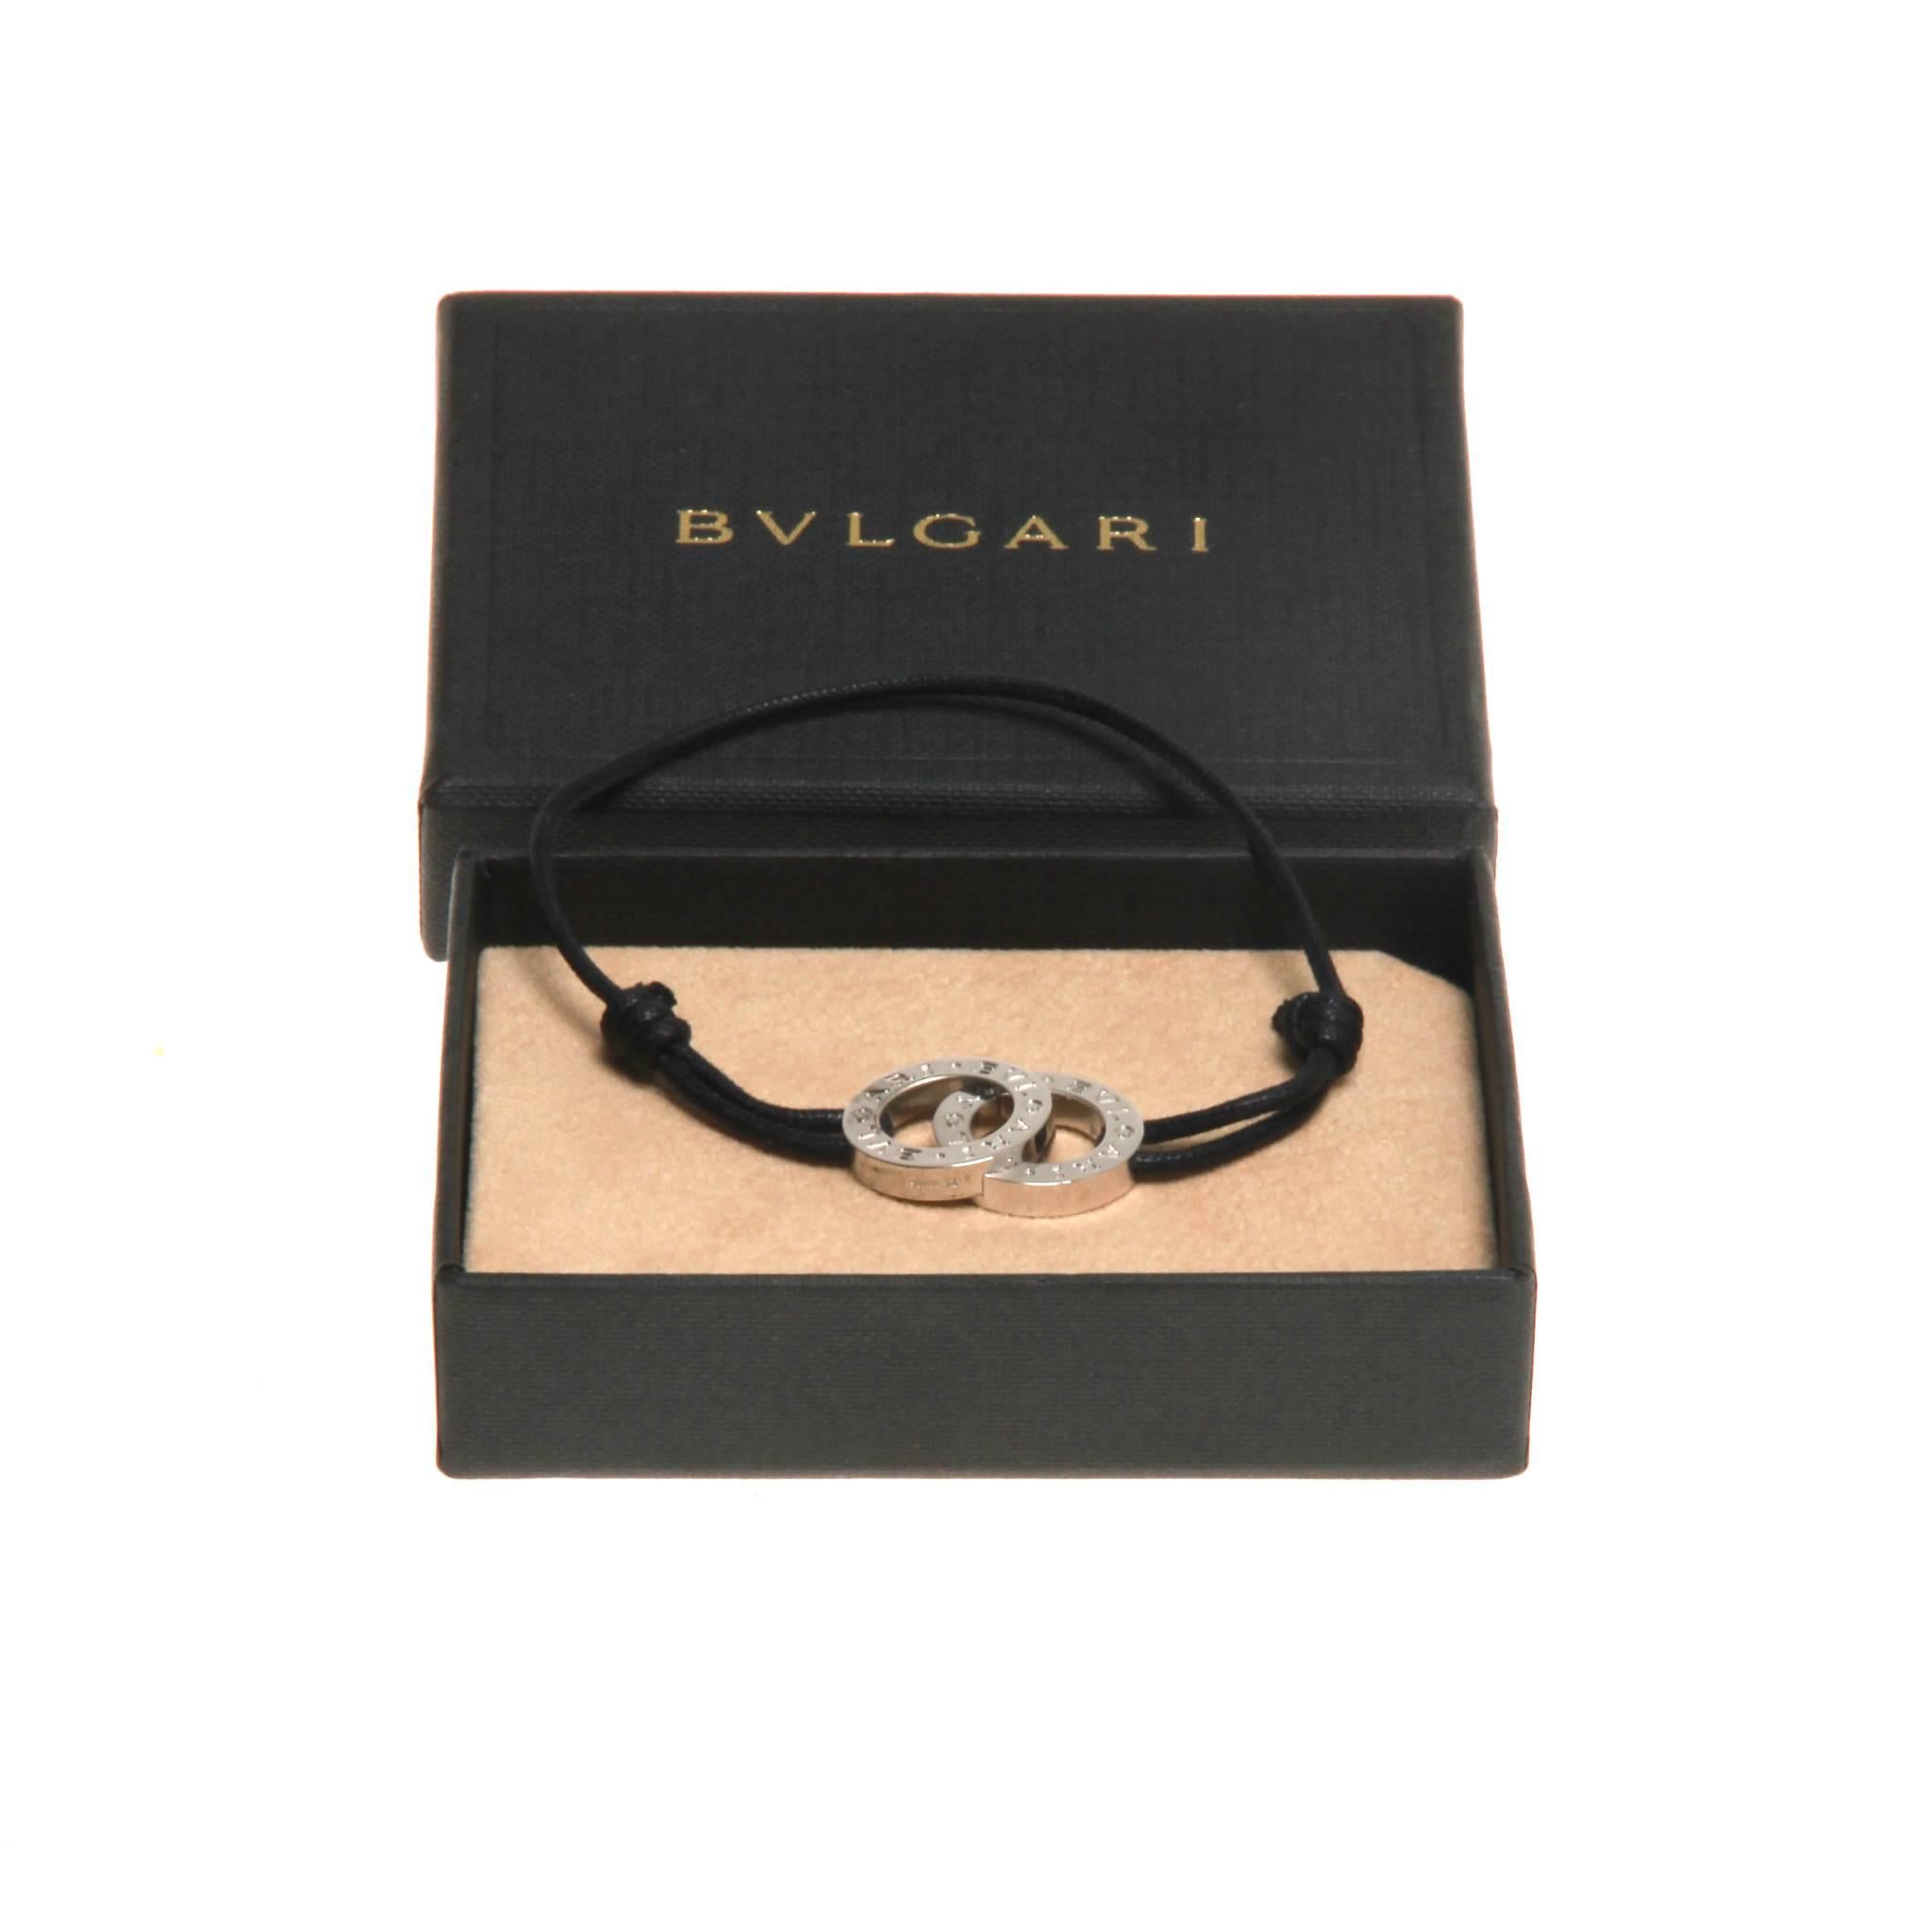 Navy cord Bvlgari Fortuna bracelet featuring sterling silver interlocking ring ornament with engraved logos and adjustable closure. Includes box.

Charm - 2.5 x 1.75cm / Strap - Diameter 7cm (adjustable).